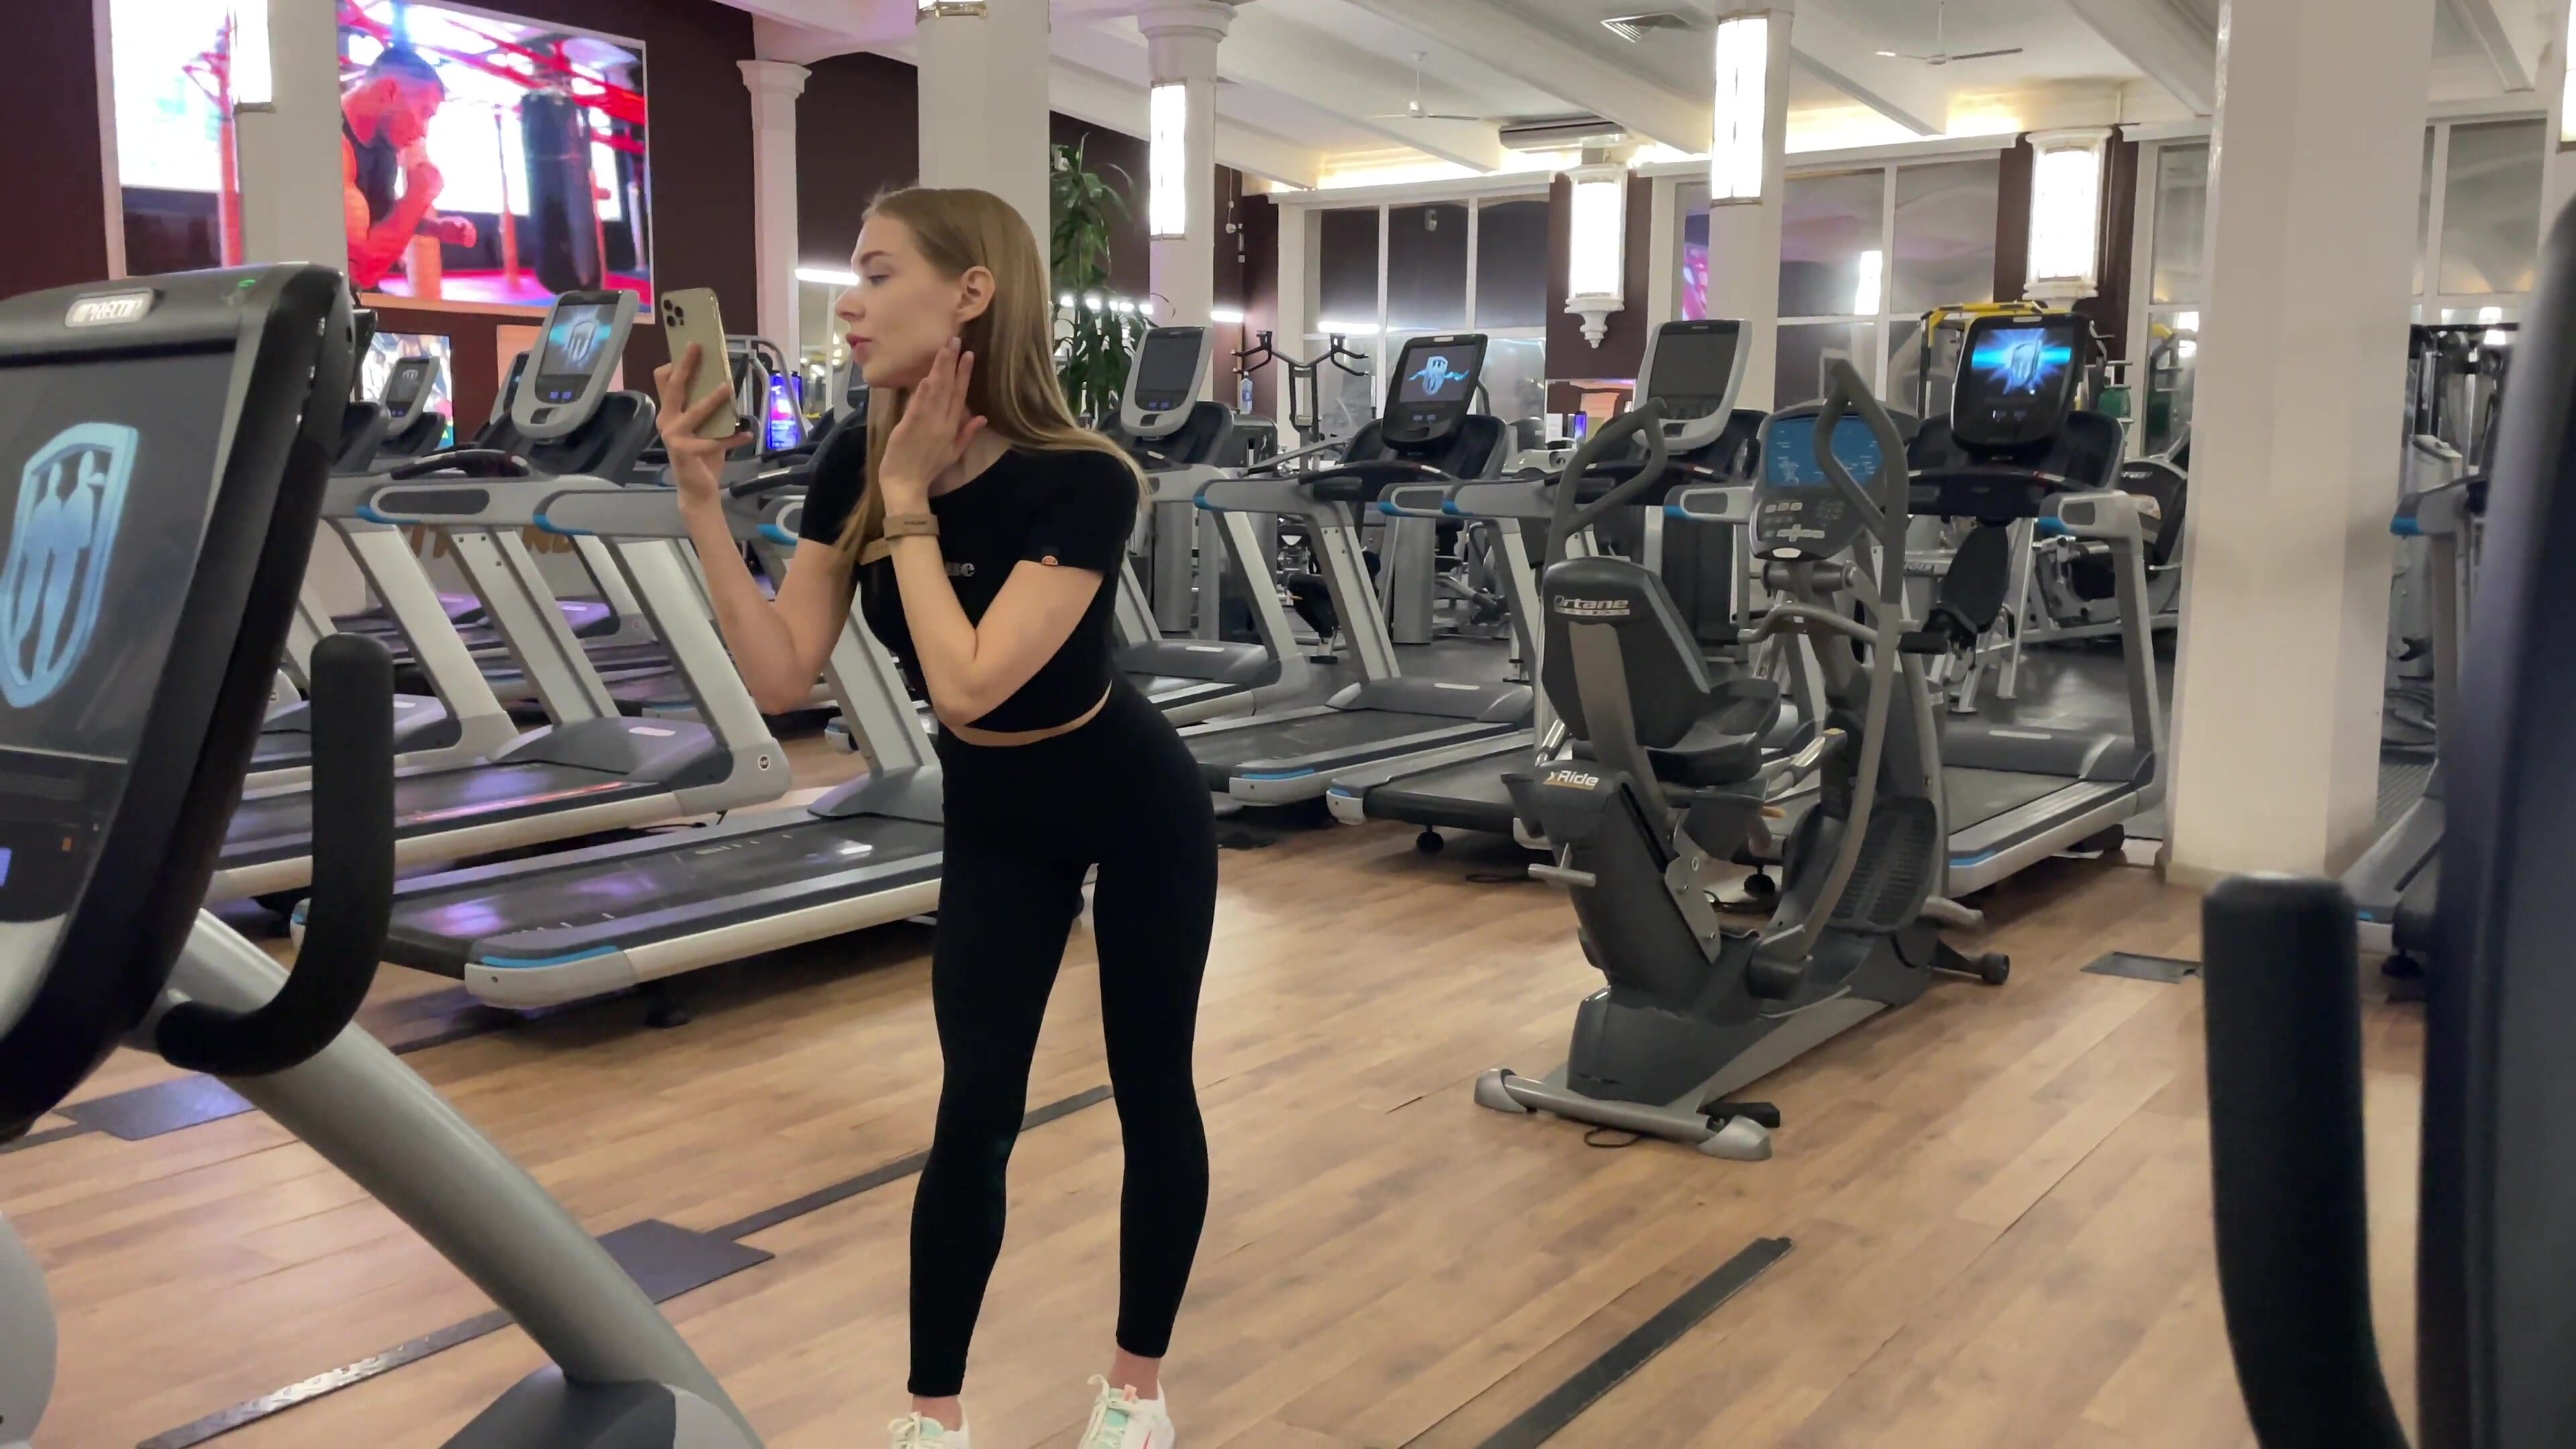 CaliforniaBabe - Quick Fuck In The Gym. Risky Public Se